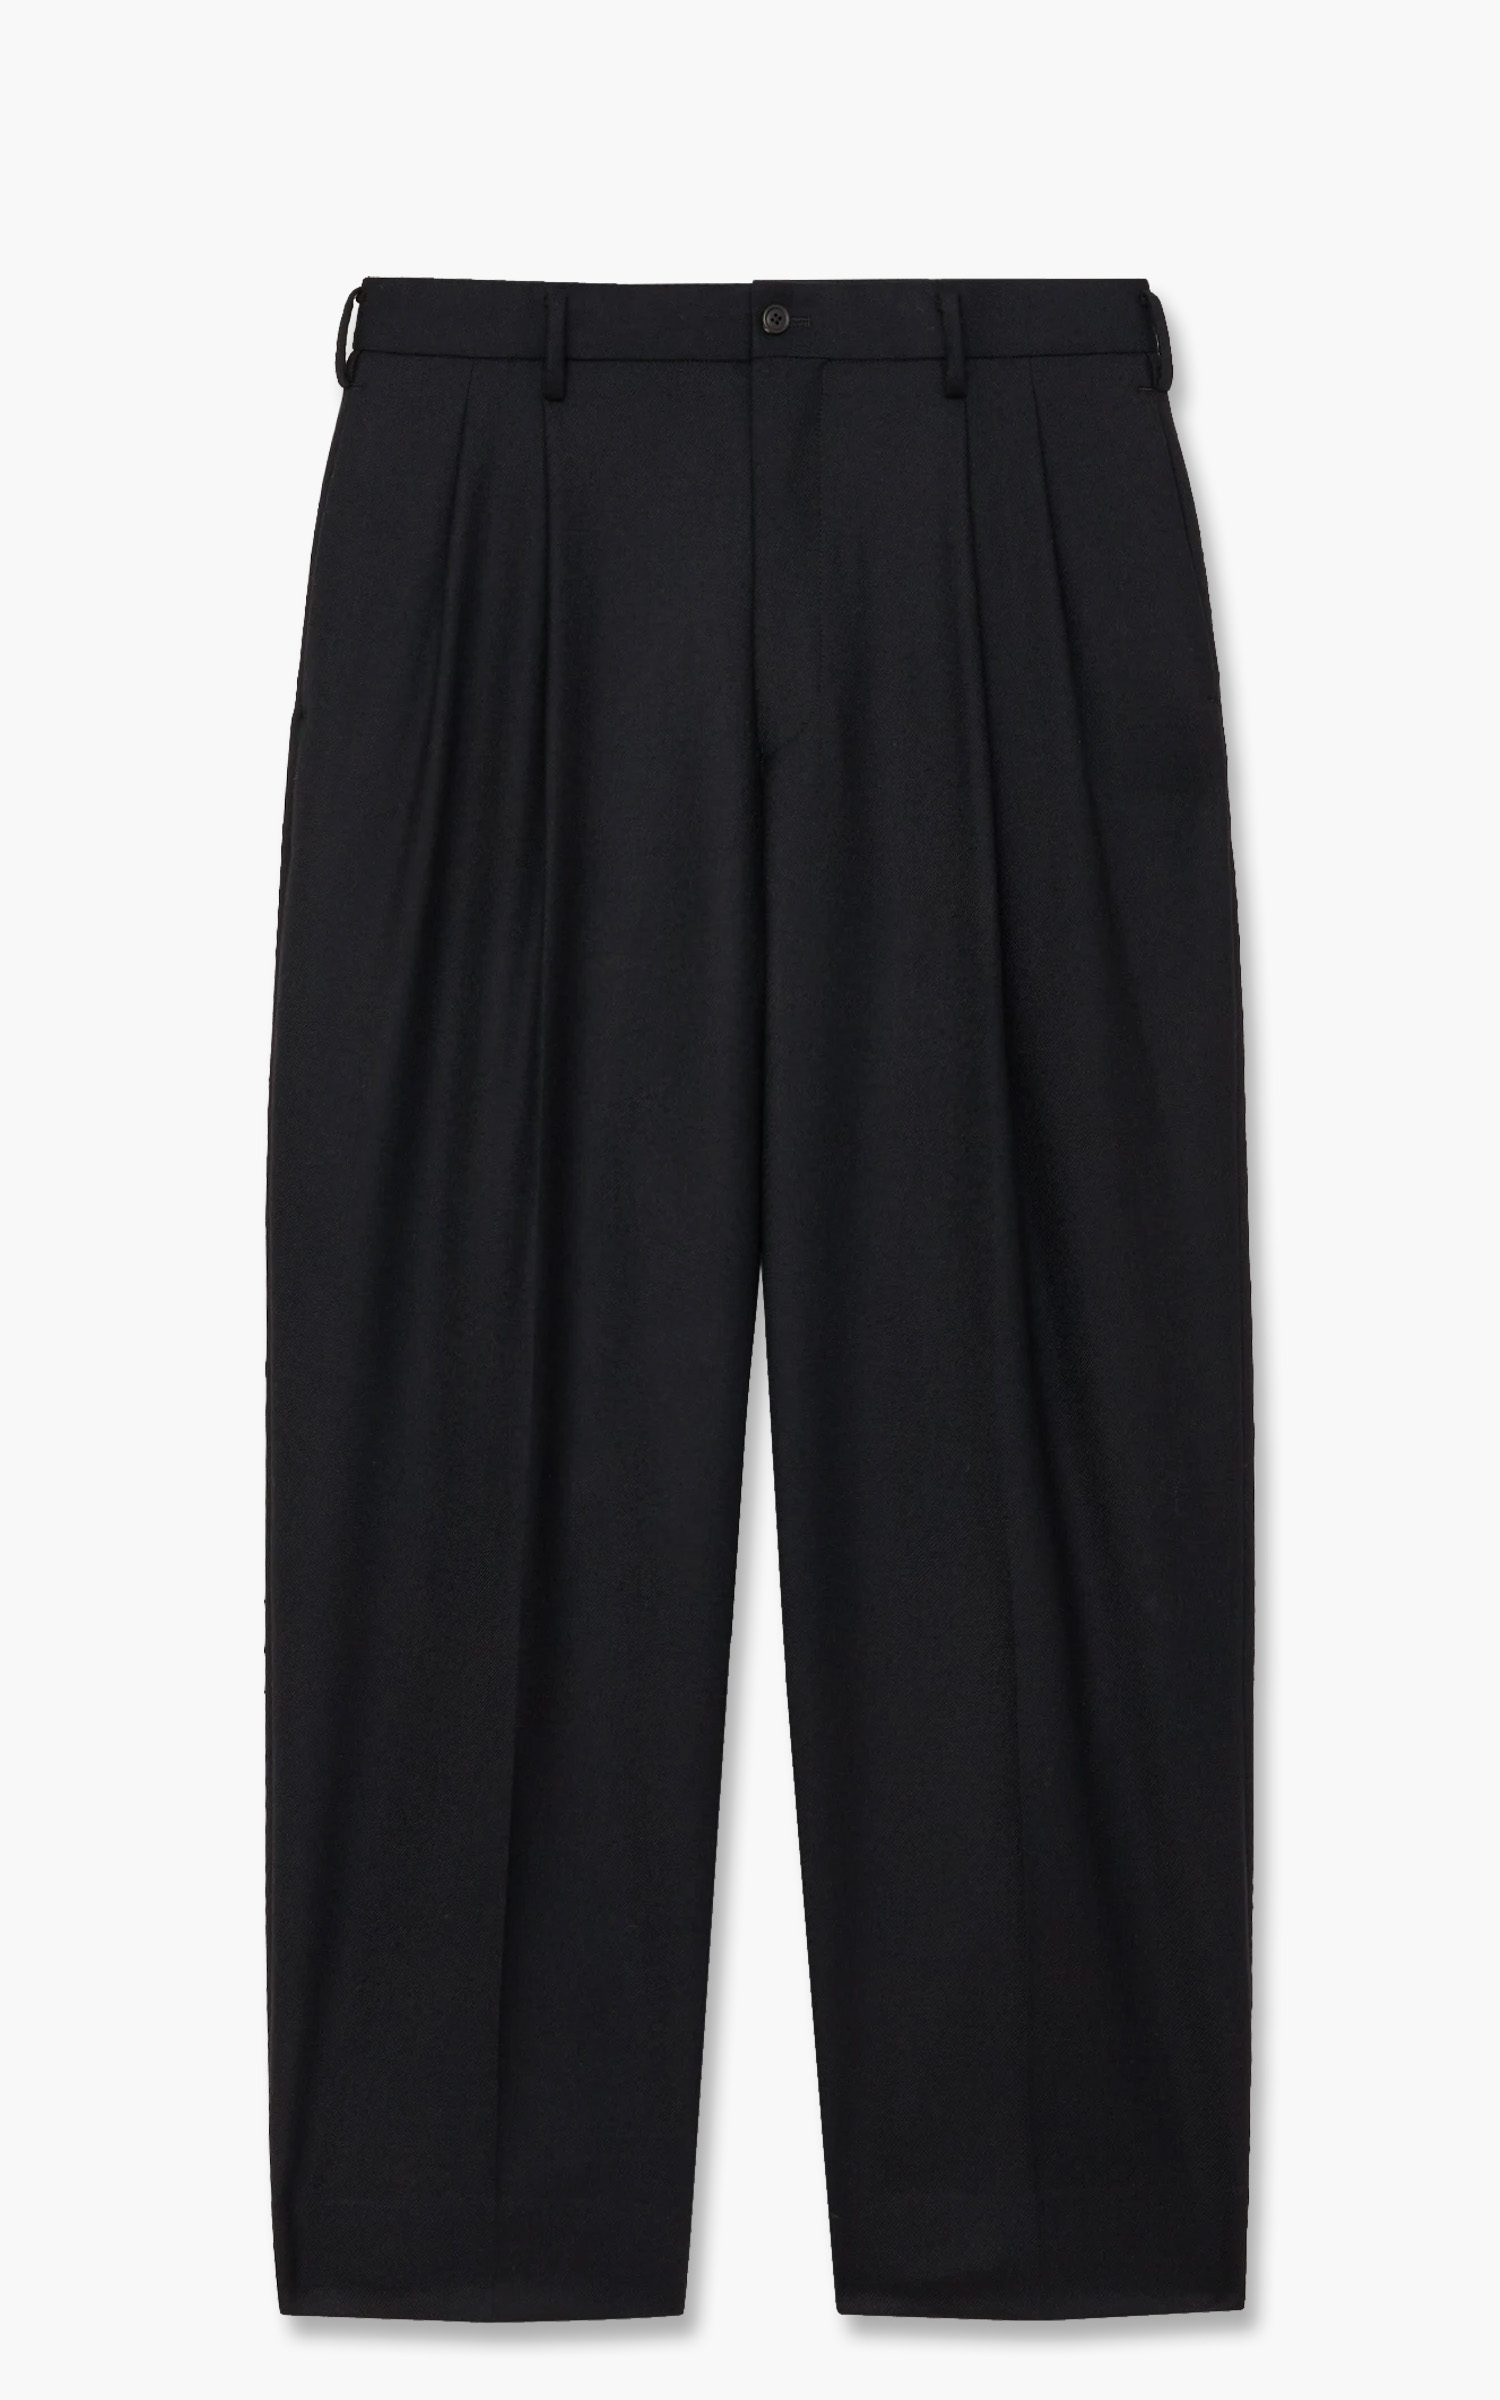 Markaware 'Marka' Wool Soft Serge 2Tuck Cocoon Fit Trousers Black | Cultizm